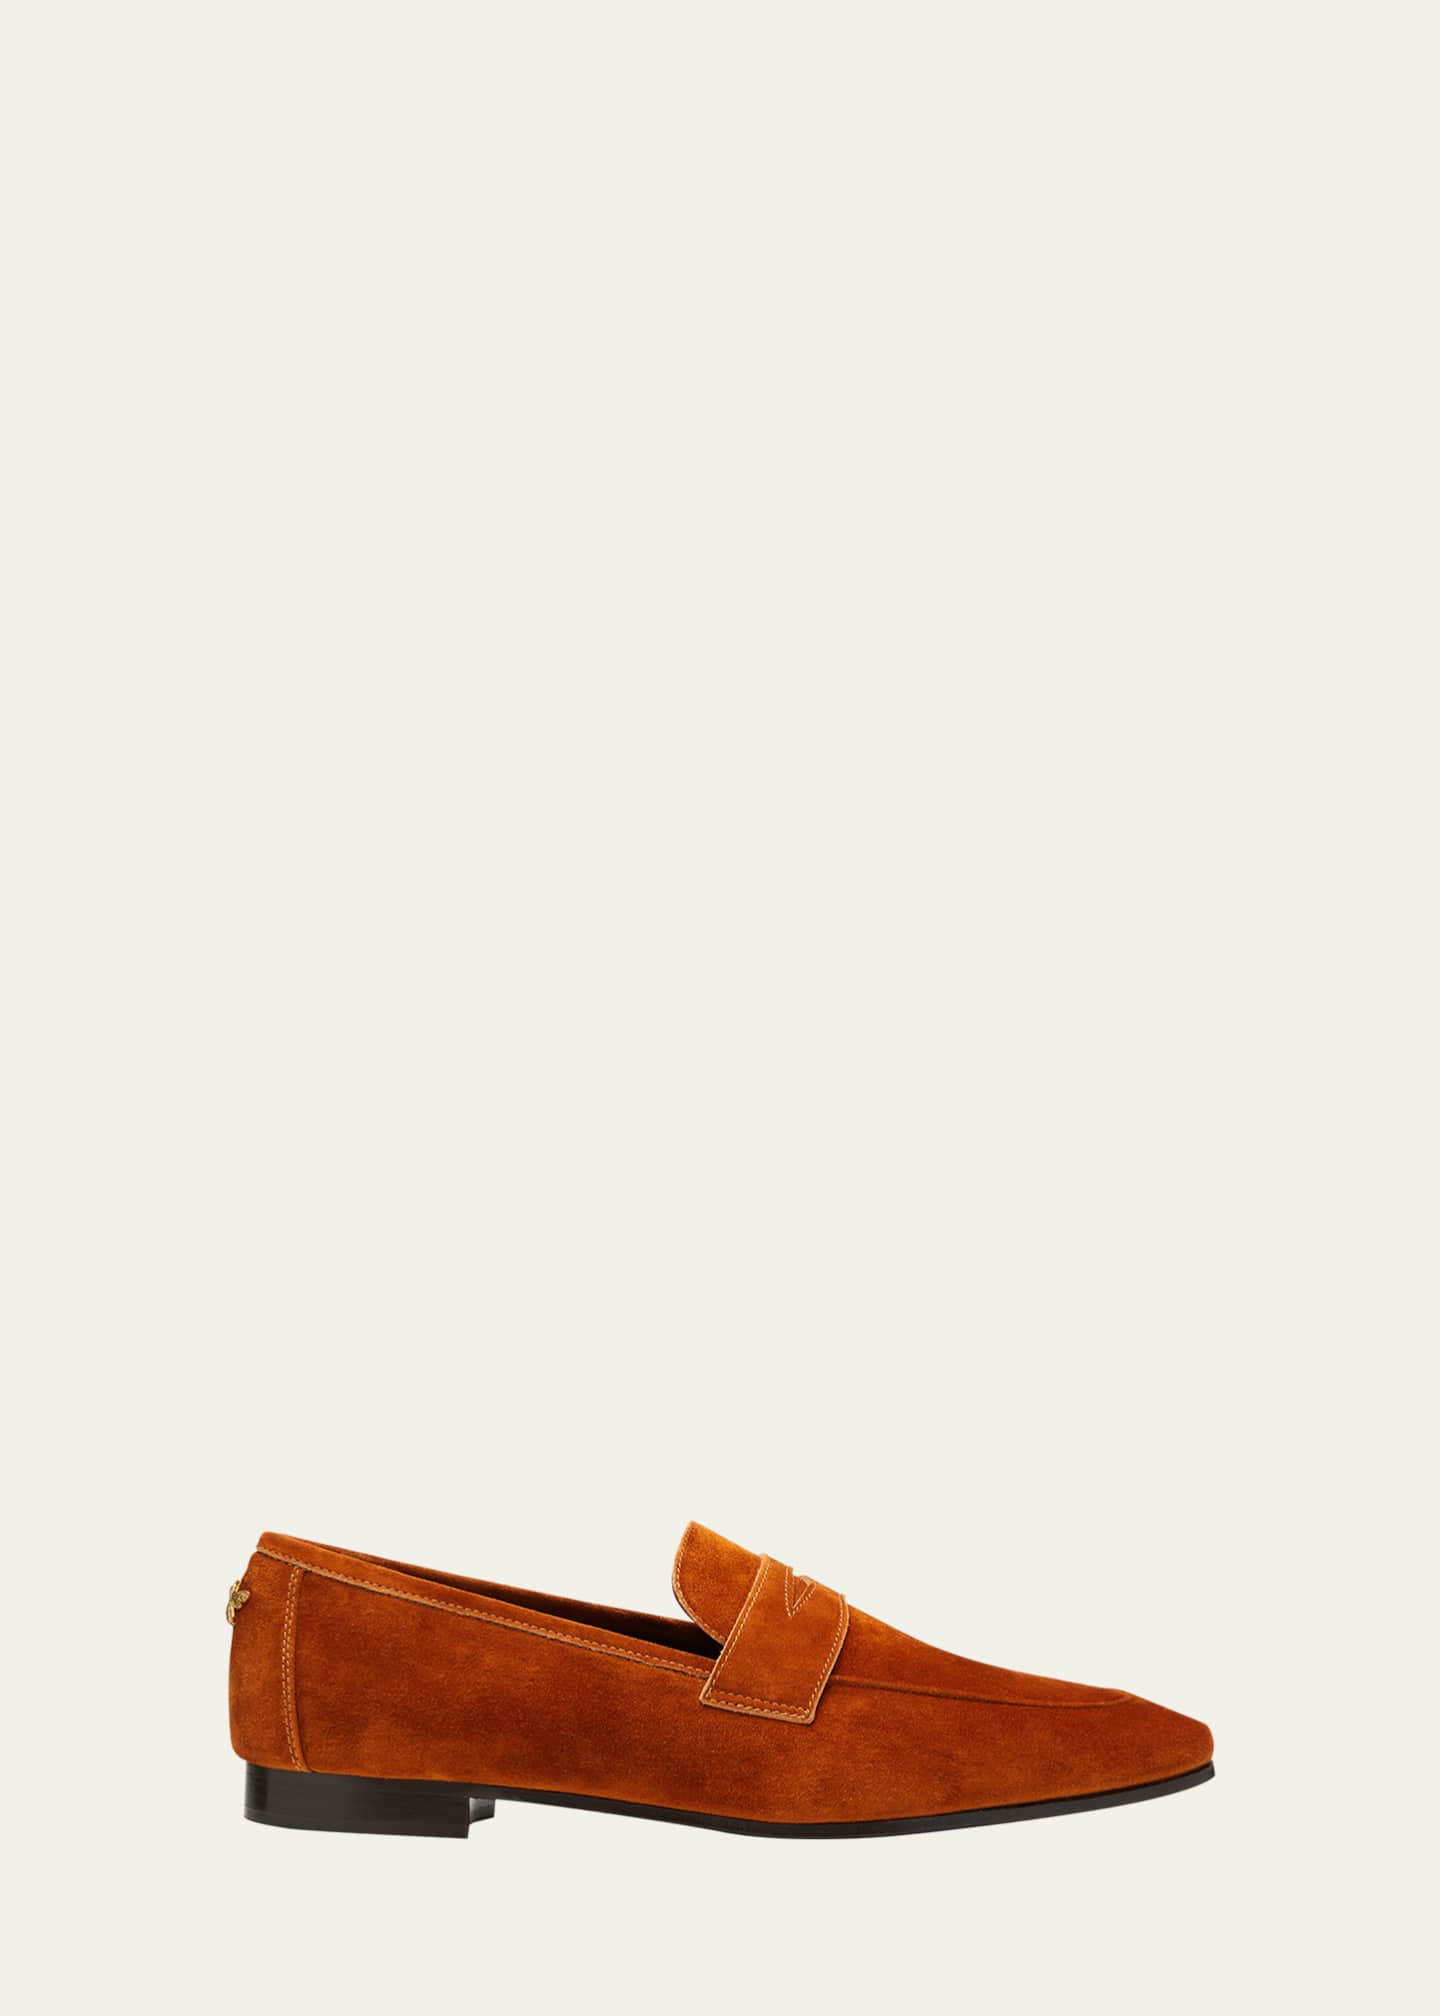 Bougeotte Flaneur Suede Penny Loafers - Bergdorf Goodman